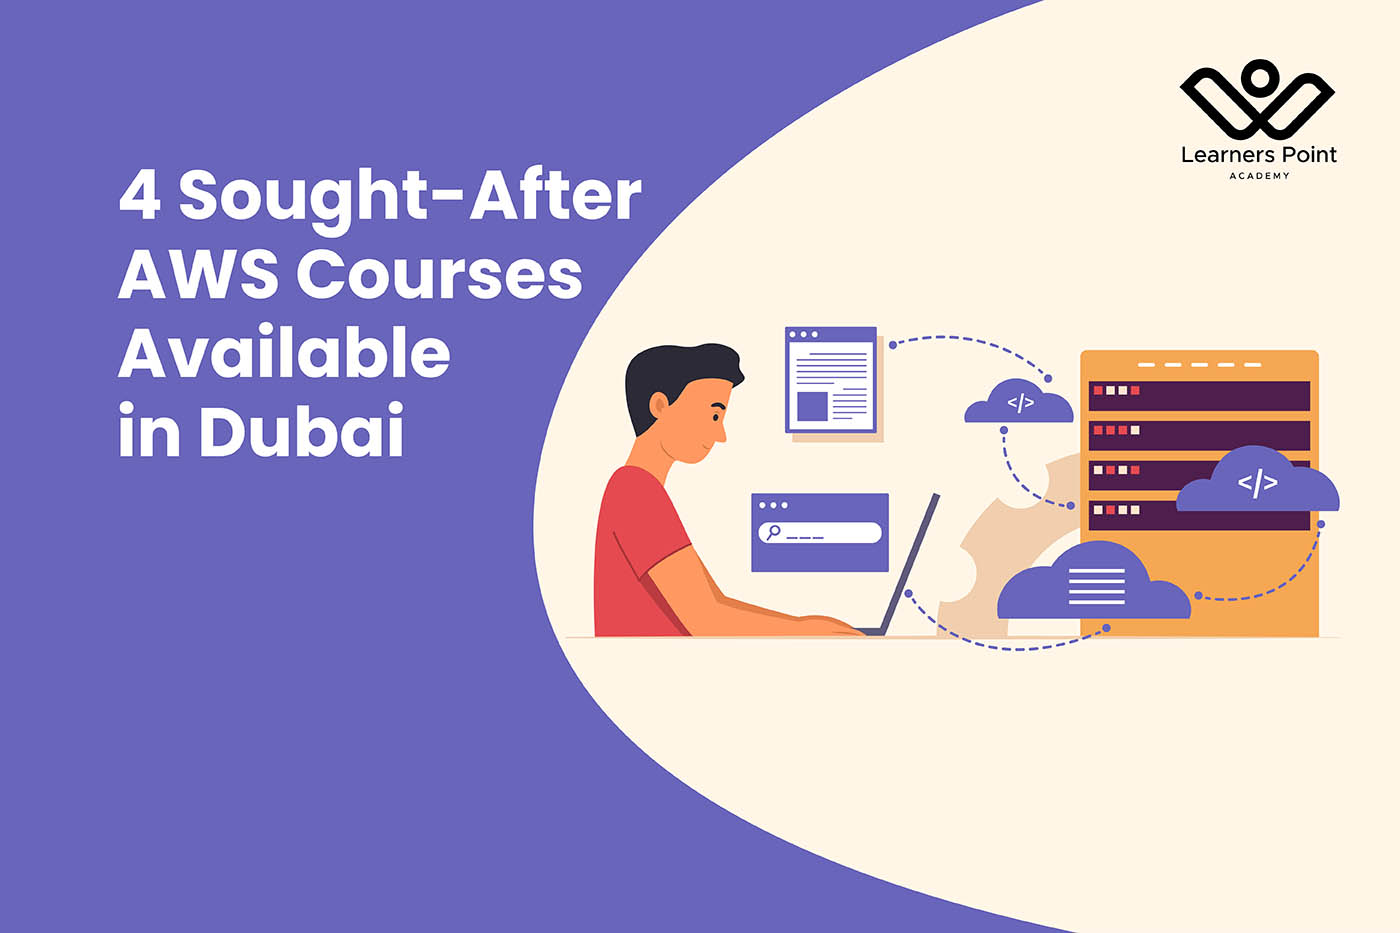 4 Sought-After AWS Courses Available in Dubai